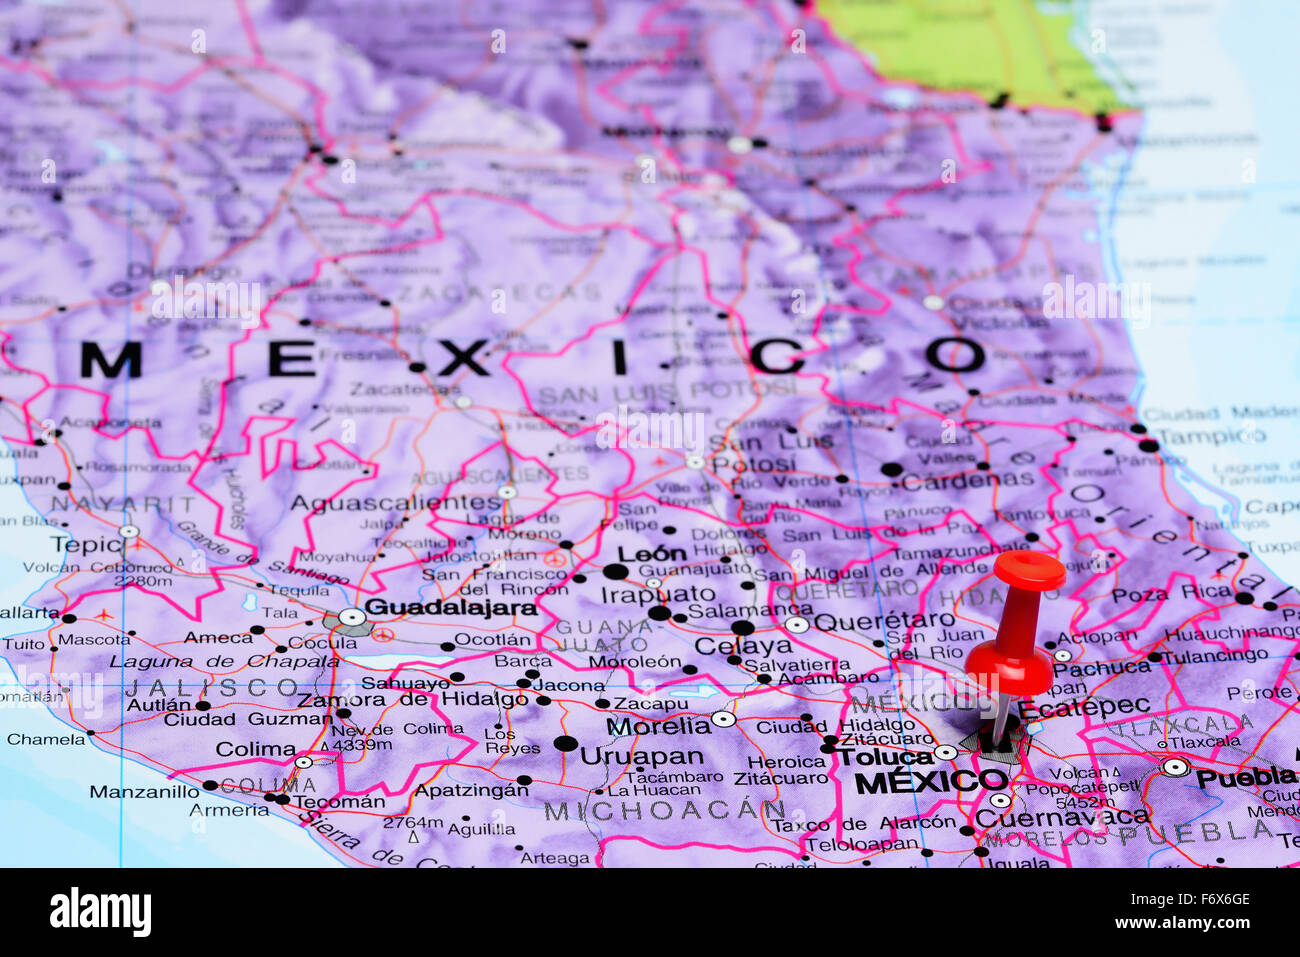 Mexico city pinned on a map of Mexico Stock Photo